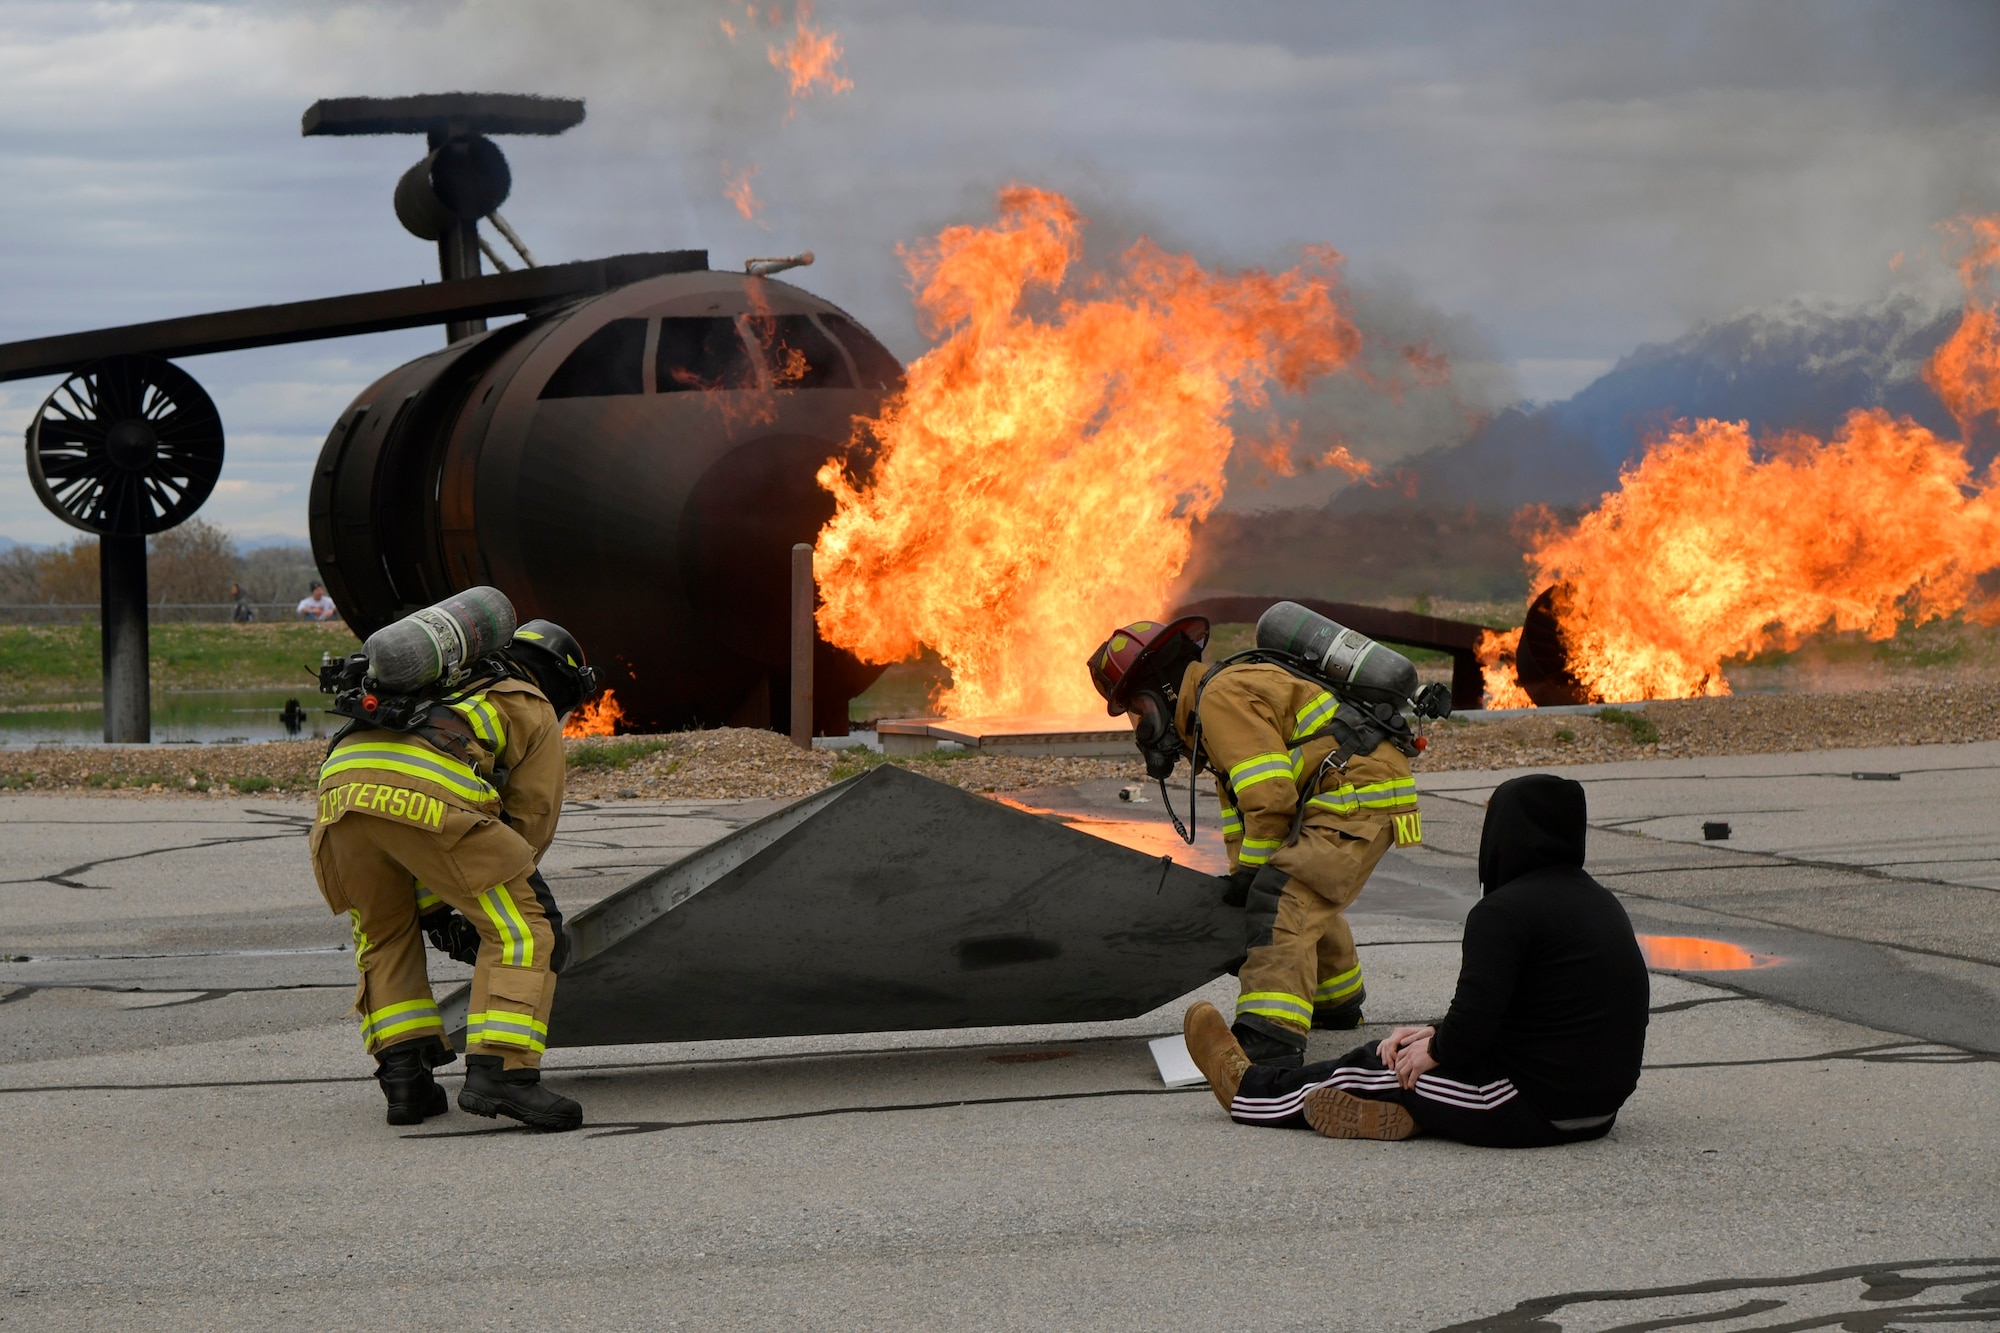 Members of various Hill Air Force Base units teamed with community responders April 17 for a joint mass casualty exercise. The exercise simulated a performing aircraft crashing into a group onlookers, causing the demand of patients to exceed resources and capabilities. The aim of the exercise was to maximize training for responders, test and evaluate emergency functions and response, and enhance readiness, integration, and response skills.